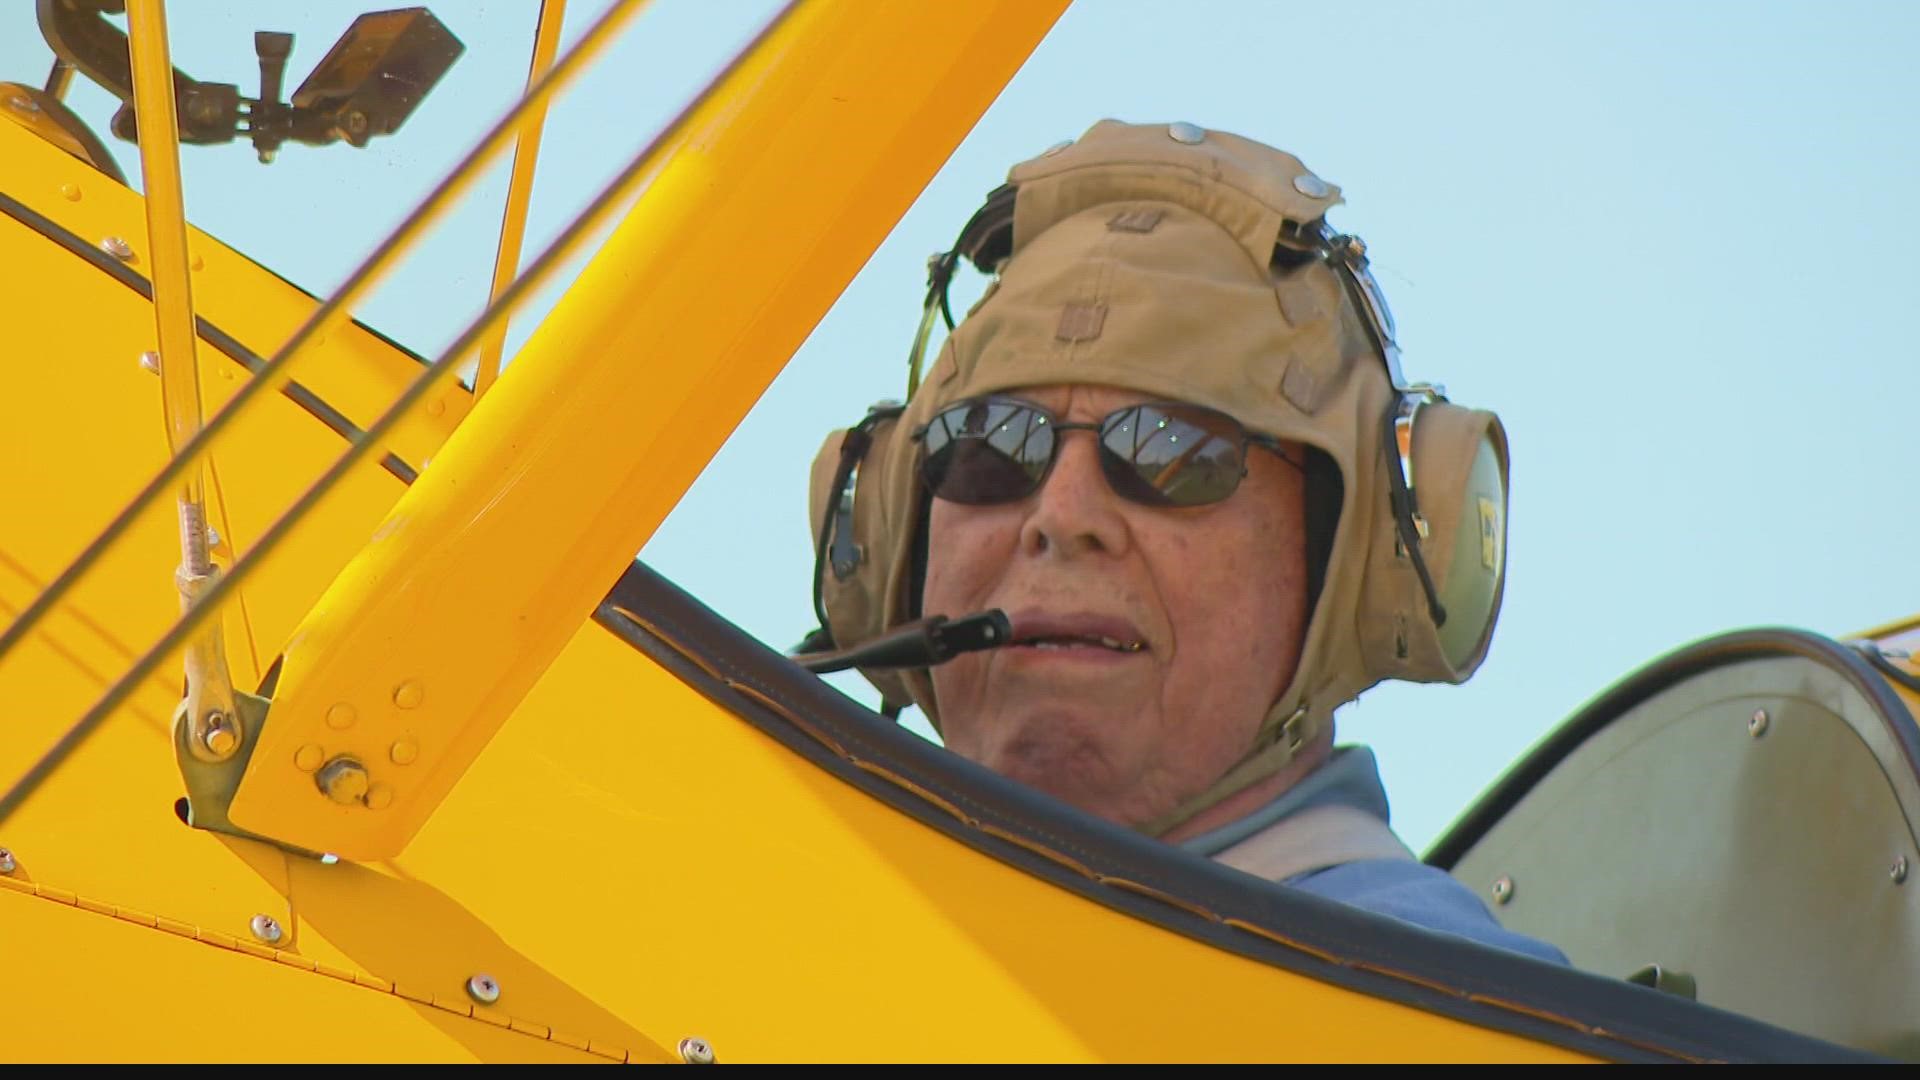 John Haynes learned to fly a Boeing Stearman airplane as a Navy pilot during World War II.